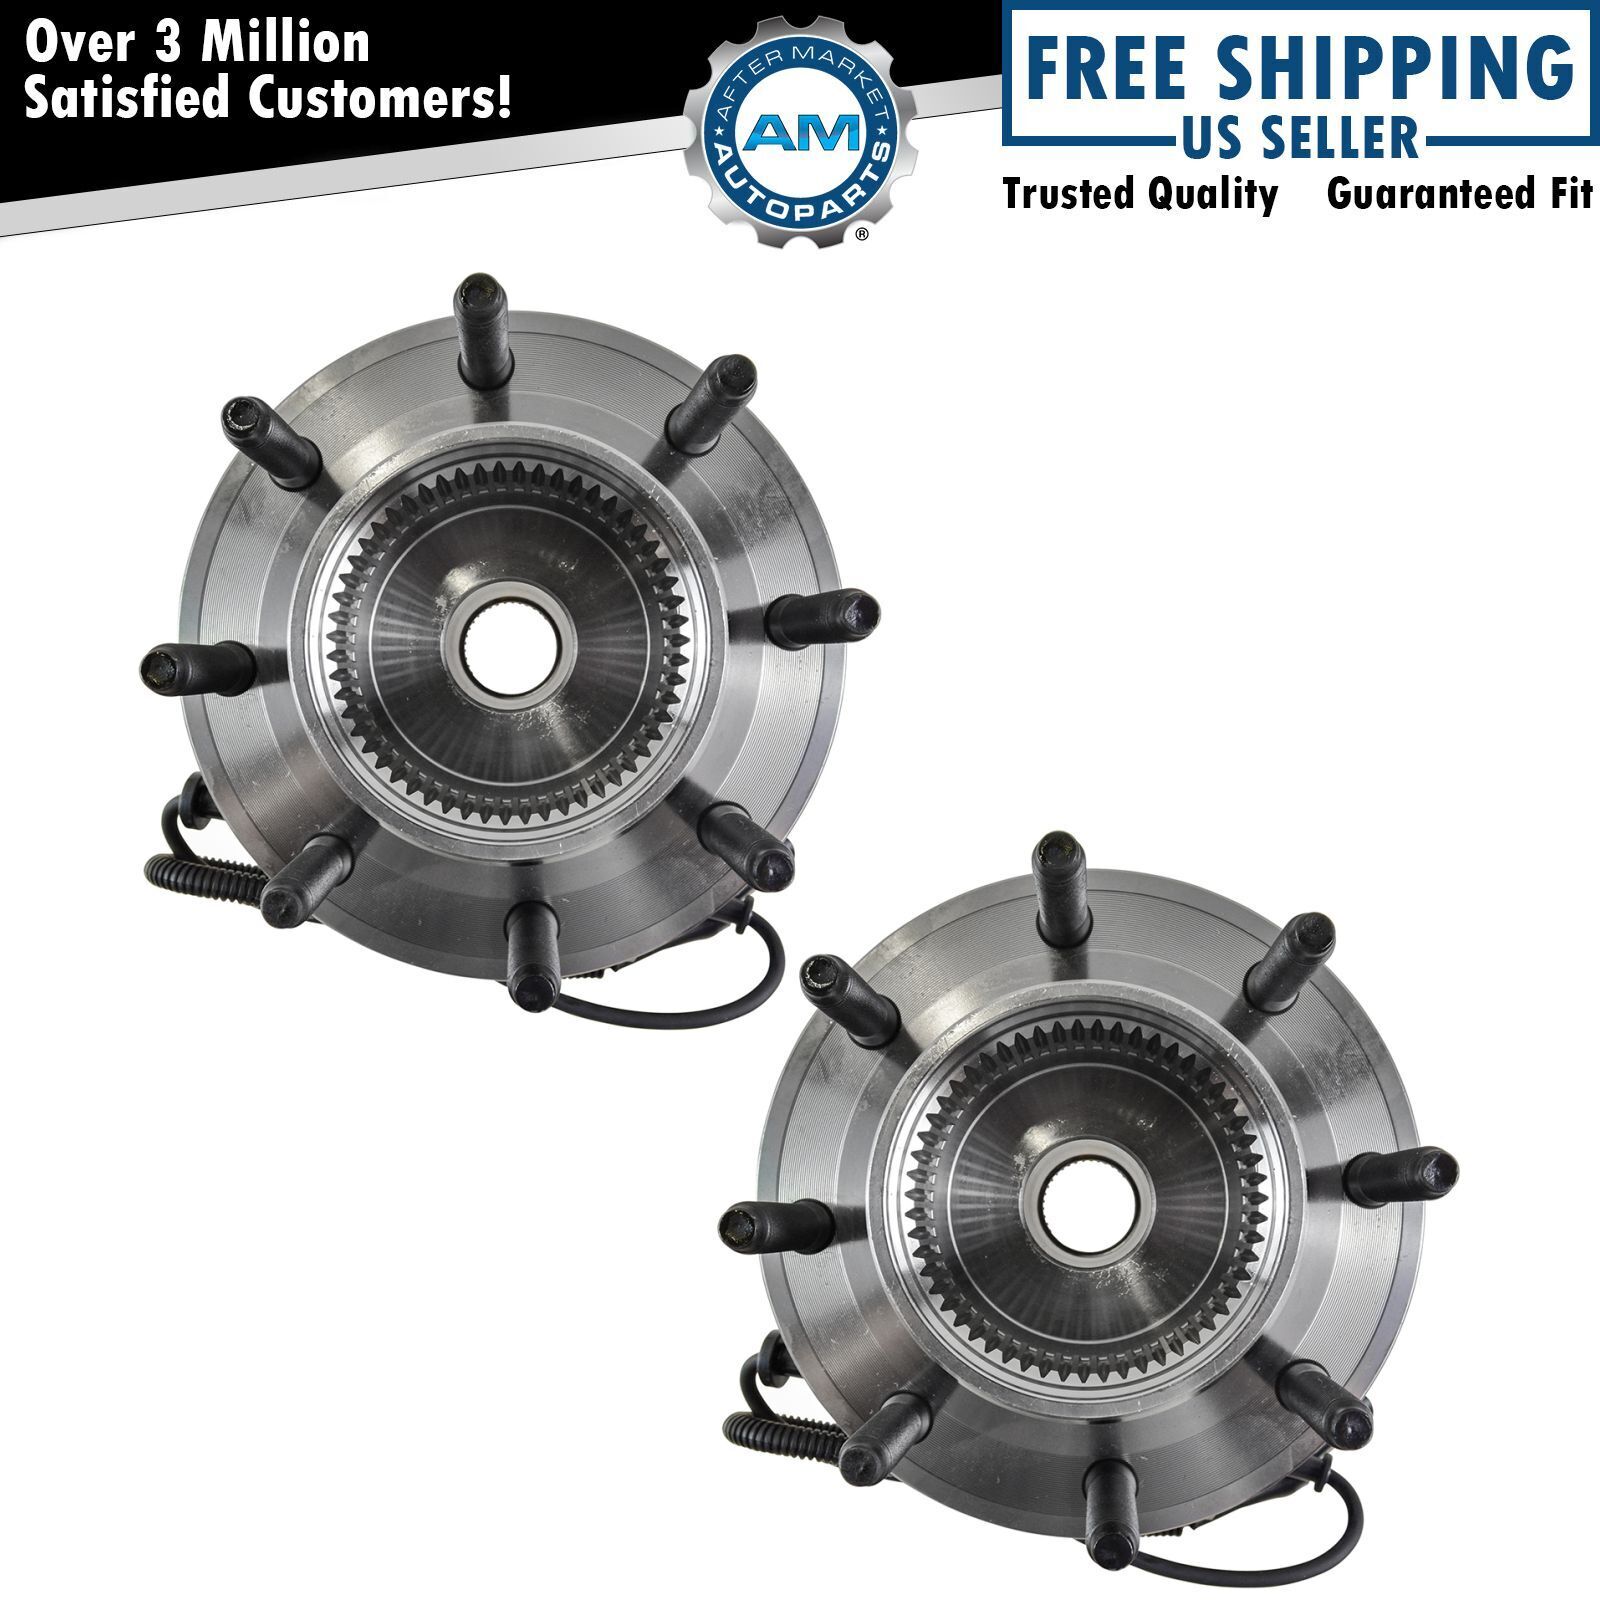 2 Front Wheel Bearing Hub Assembly Fits Ford F250 F350 Super Duty Excursion 4X4